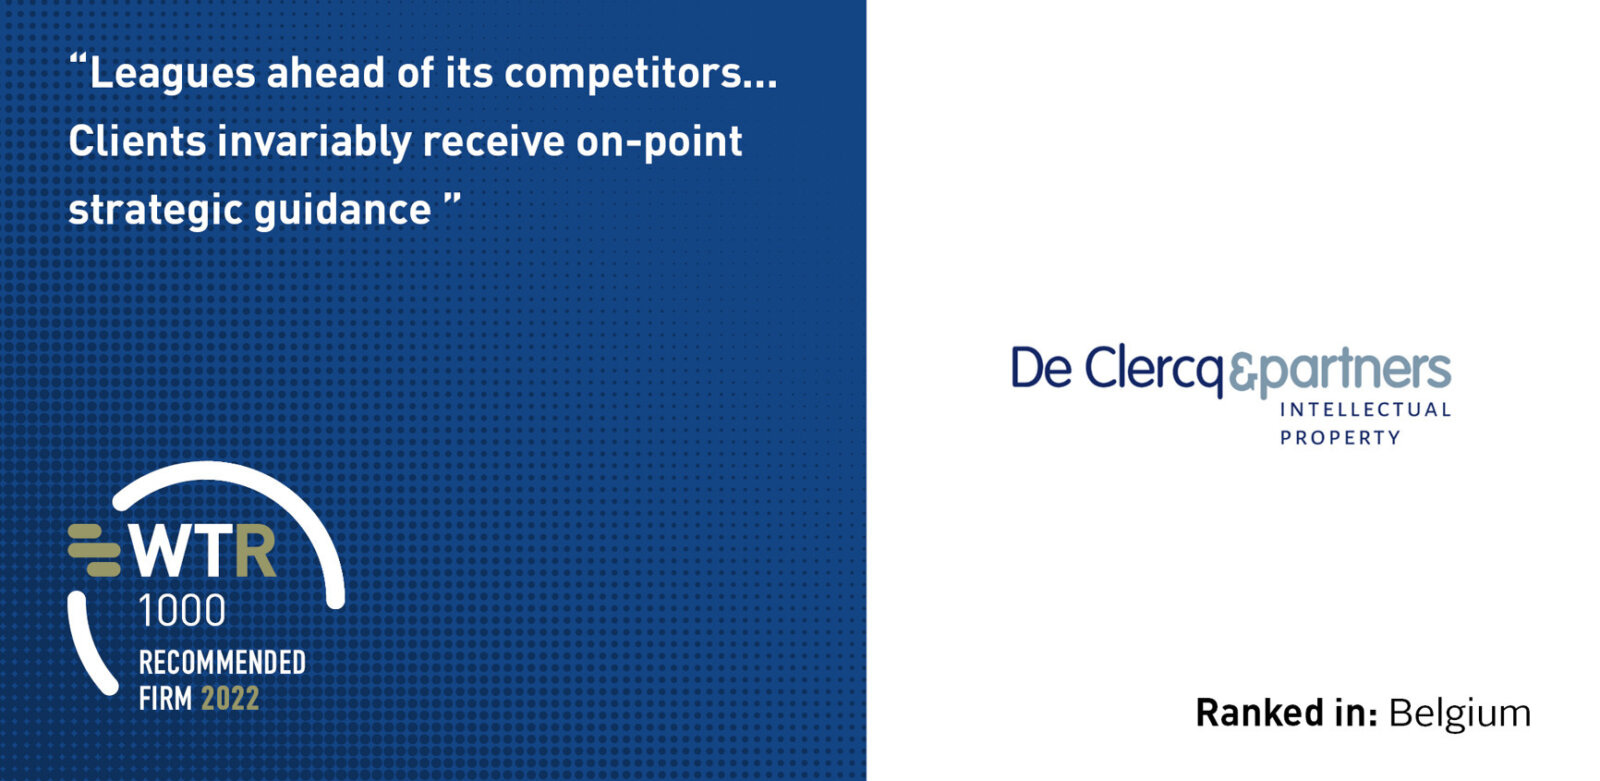 De Clercq & Partners features again in the renowned WTR 1000 Guide